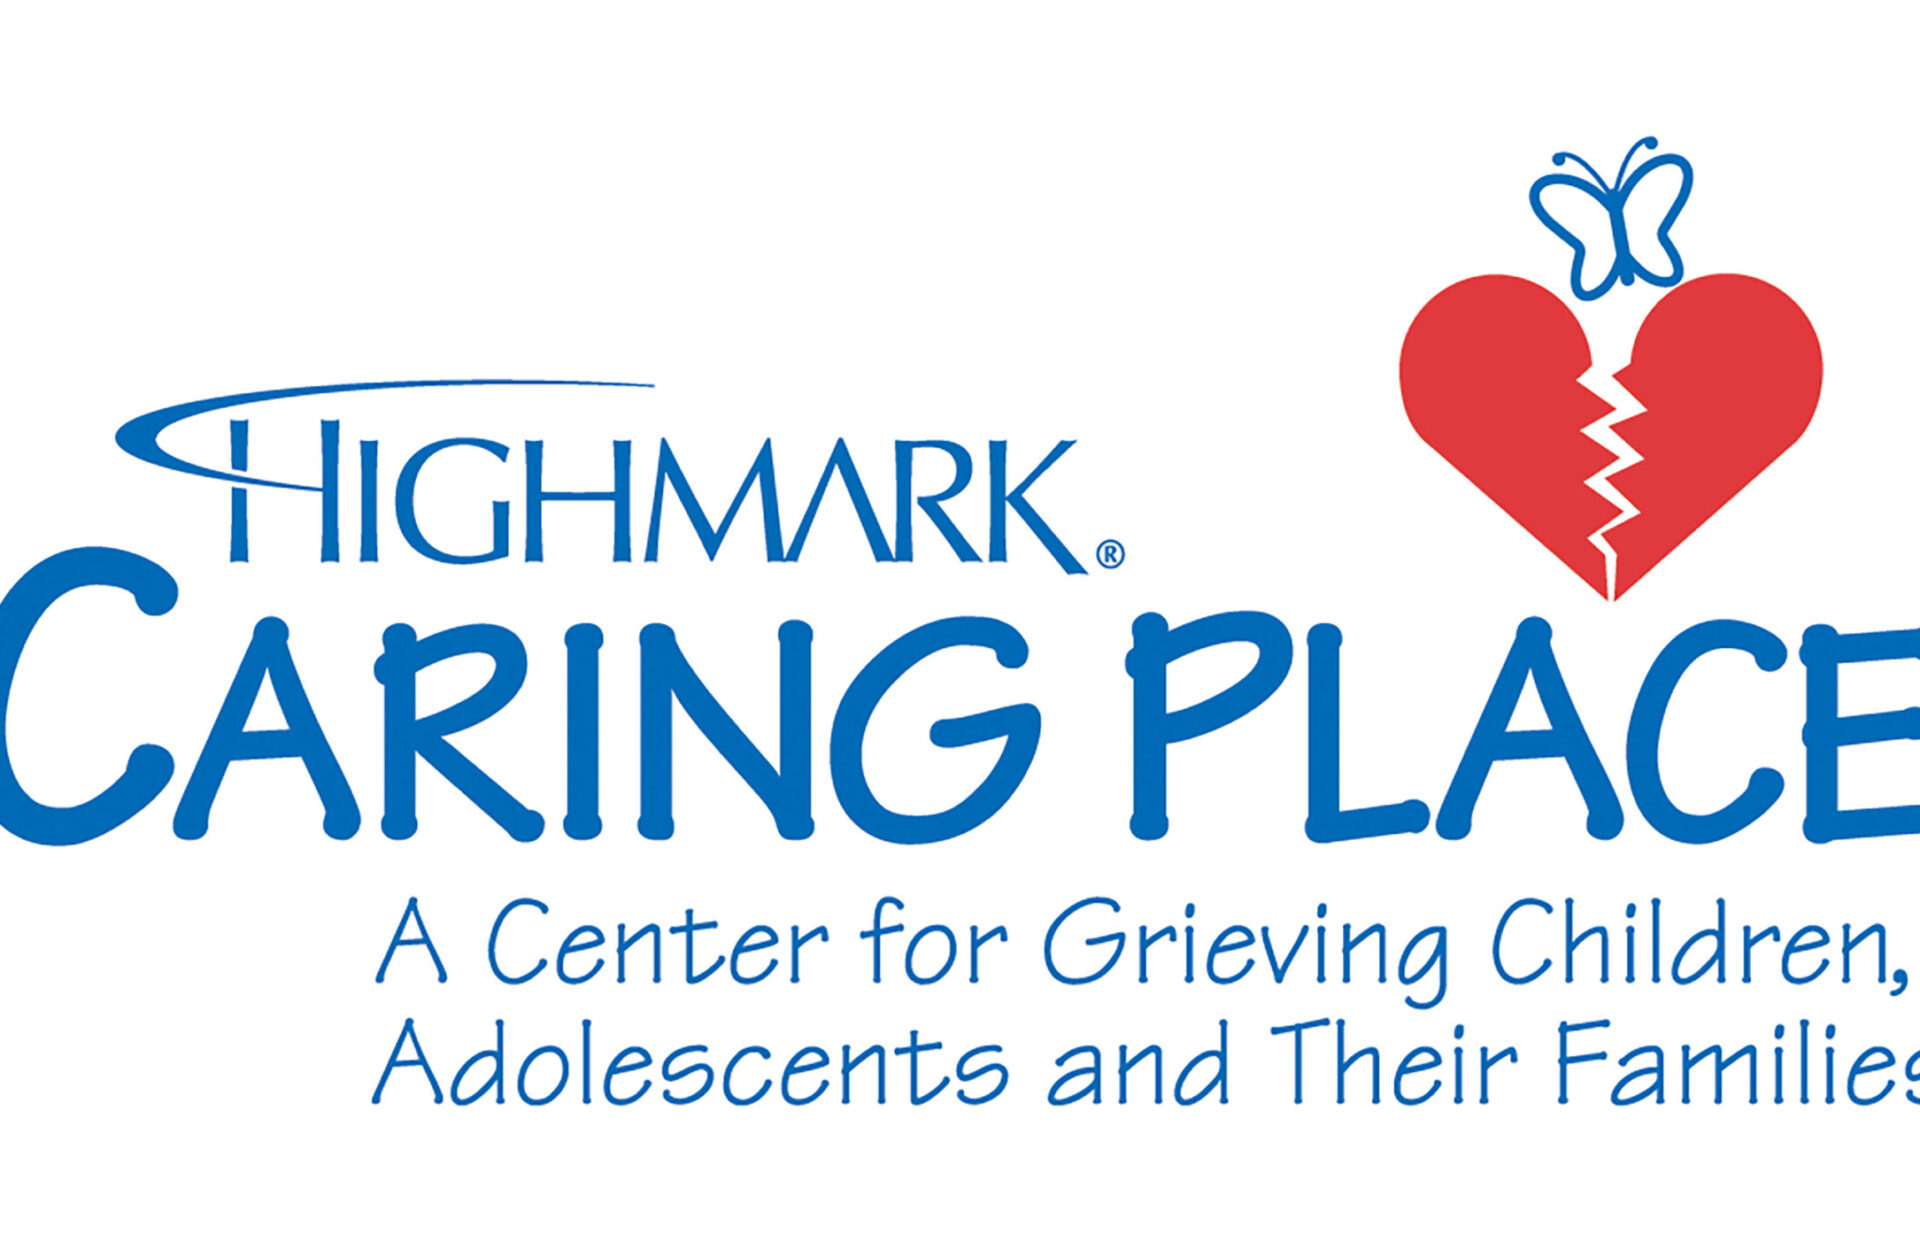 HOPE Lives On: Artwork from the Highmark Caring Place